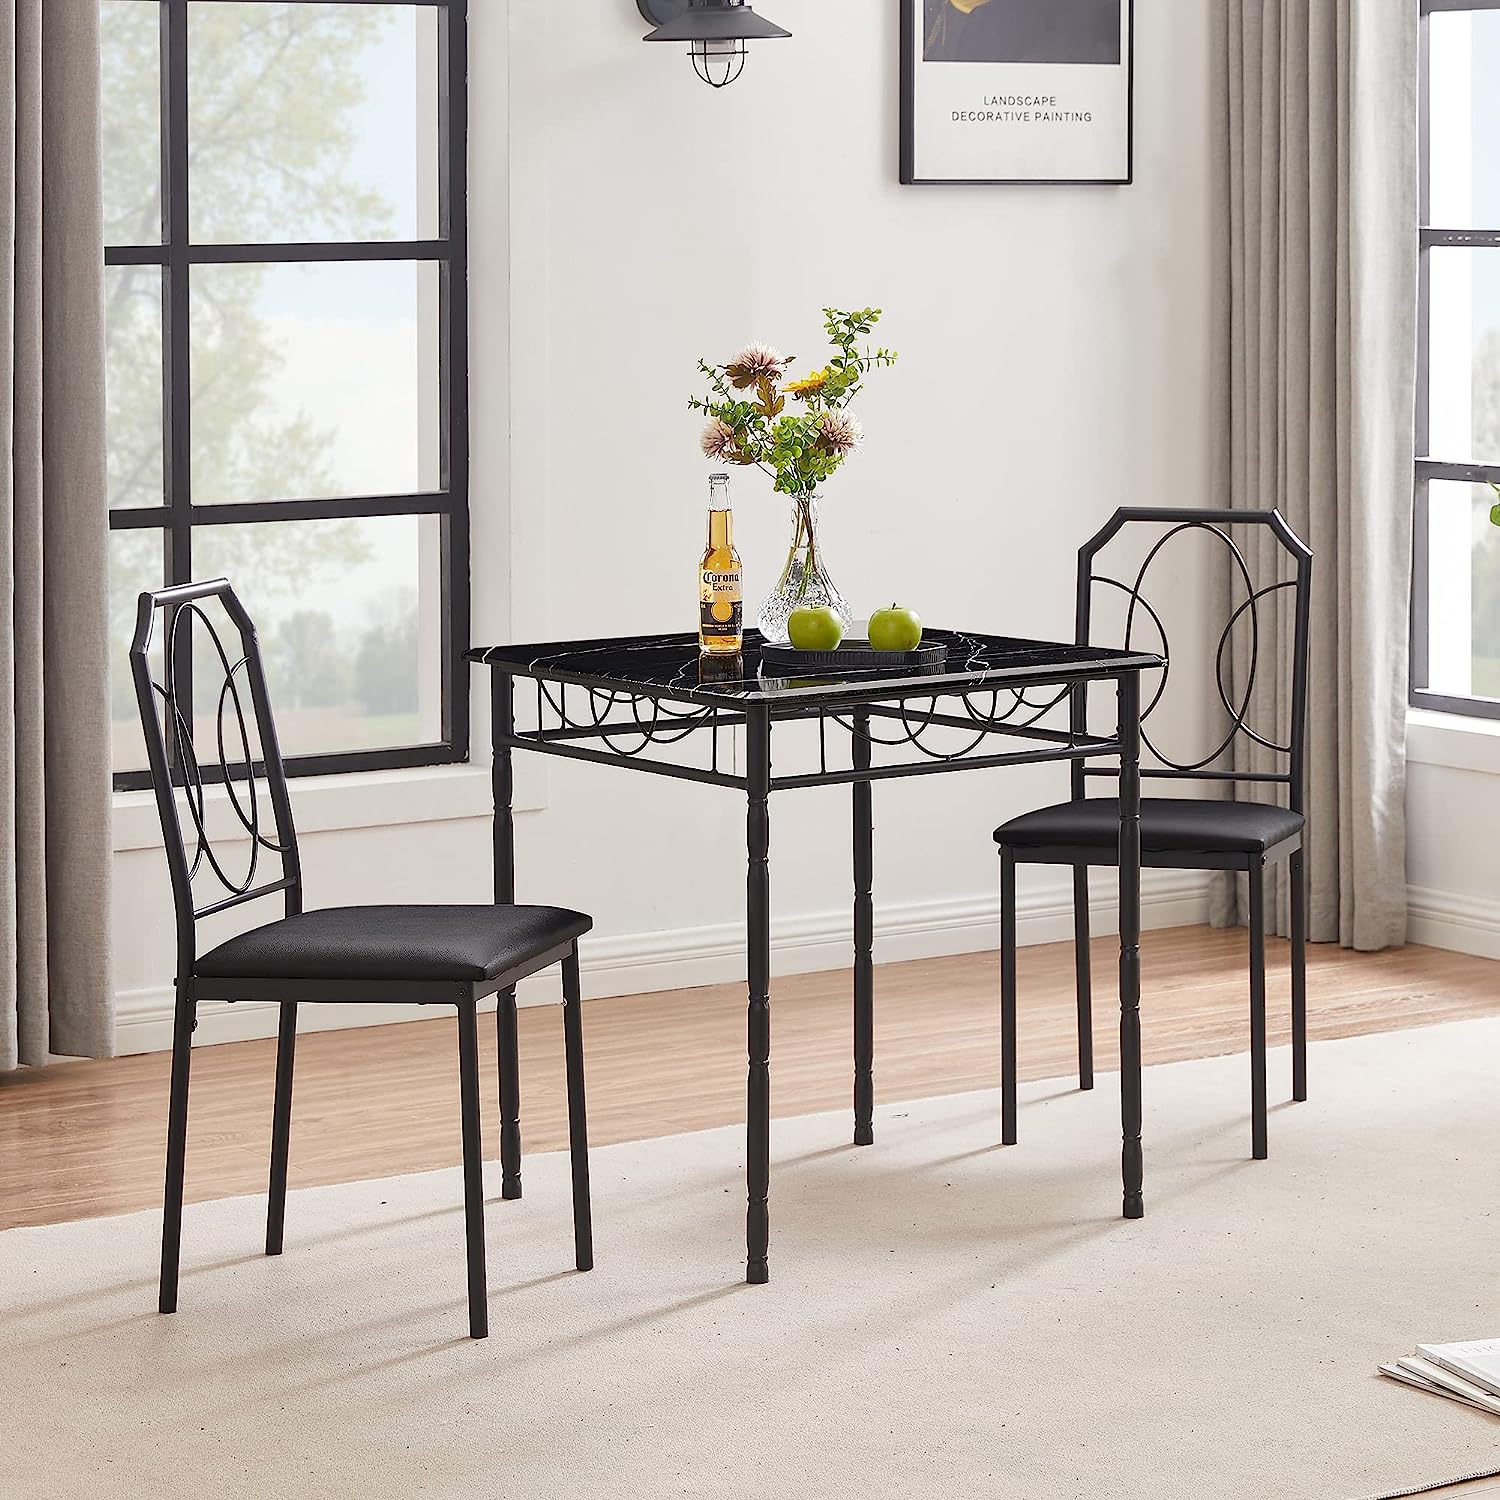 VECELO 5 Pieces Table Sets,43.3" Table&Chairs for 4,Industrial Counter Height Tabletop with Bar Stools for Dining Room